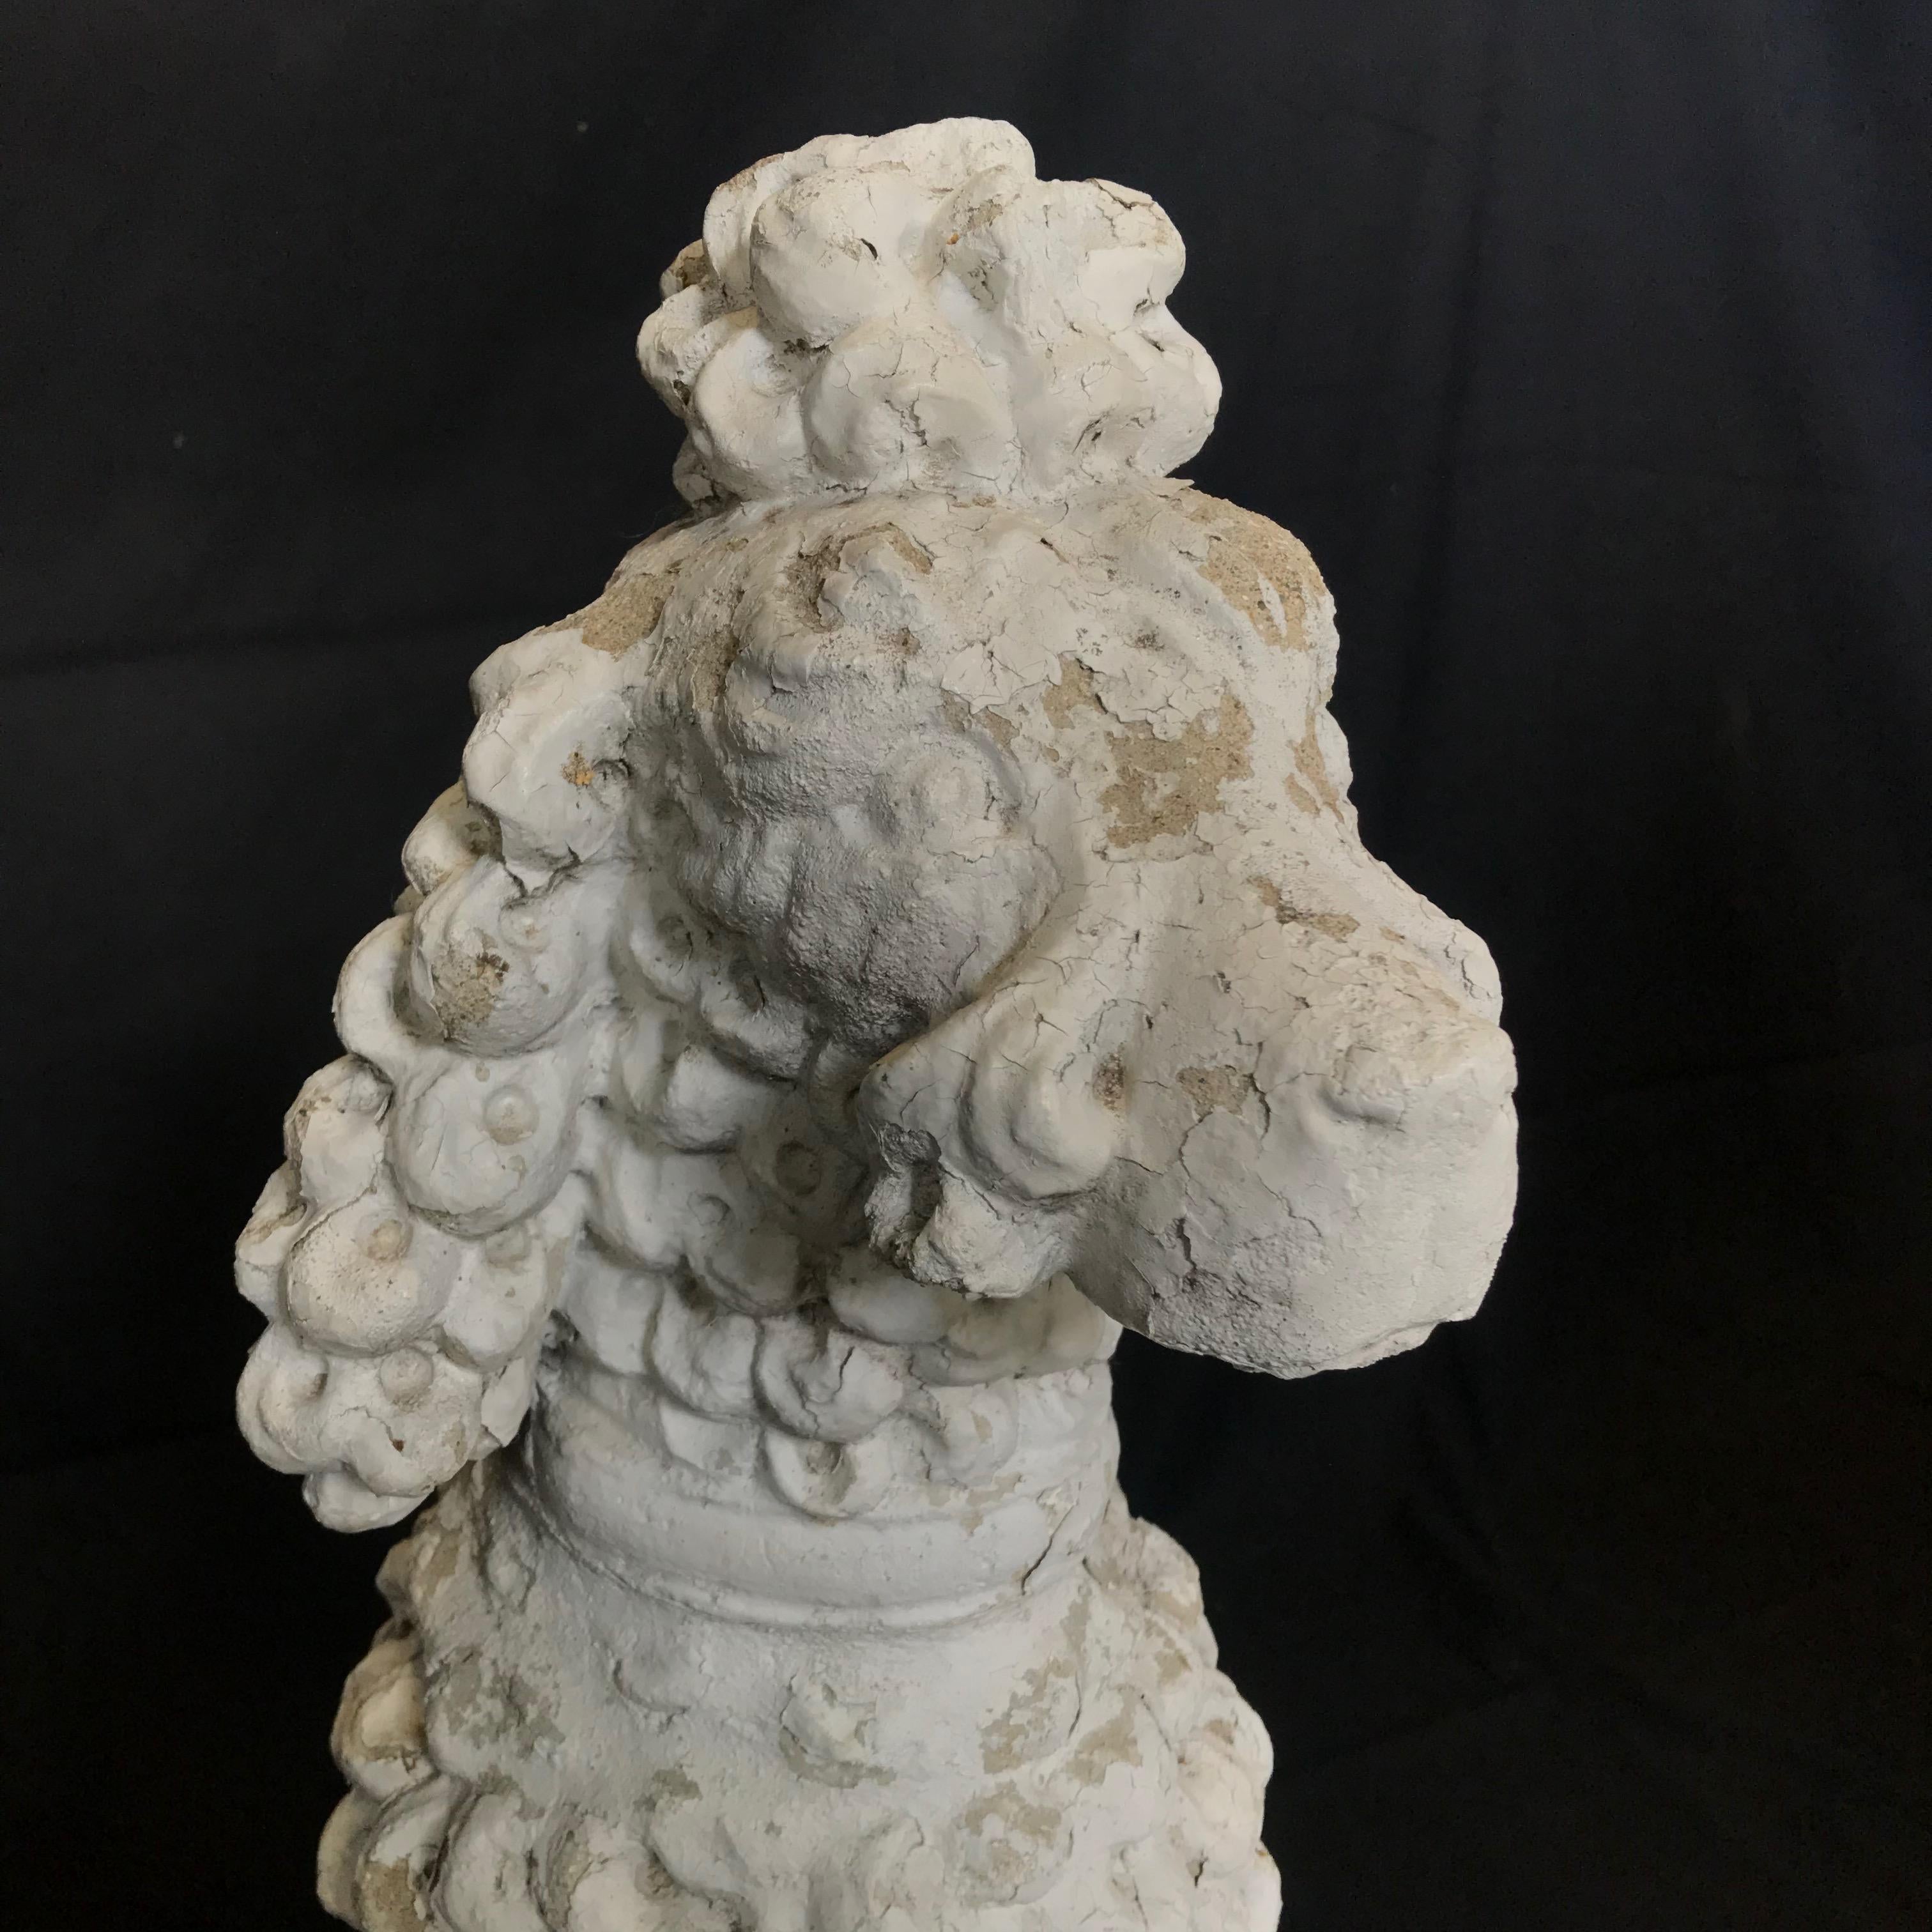 Dog Lovers' Life-Sized Stone French Poodle Sculpture Statue 5